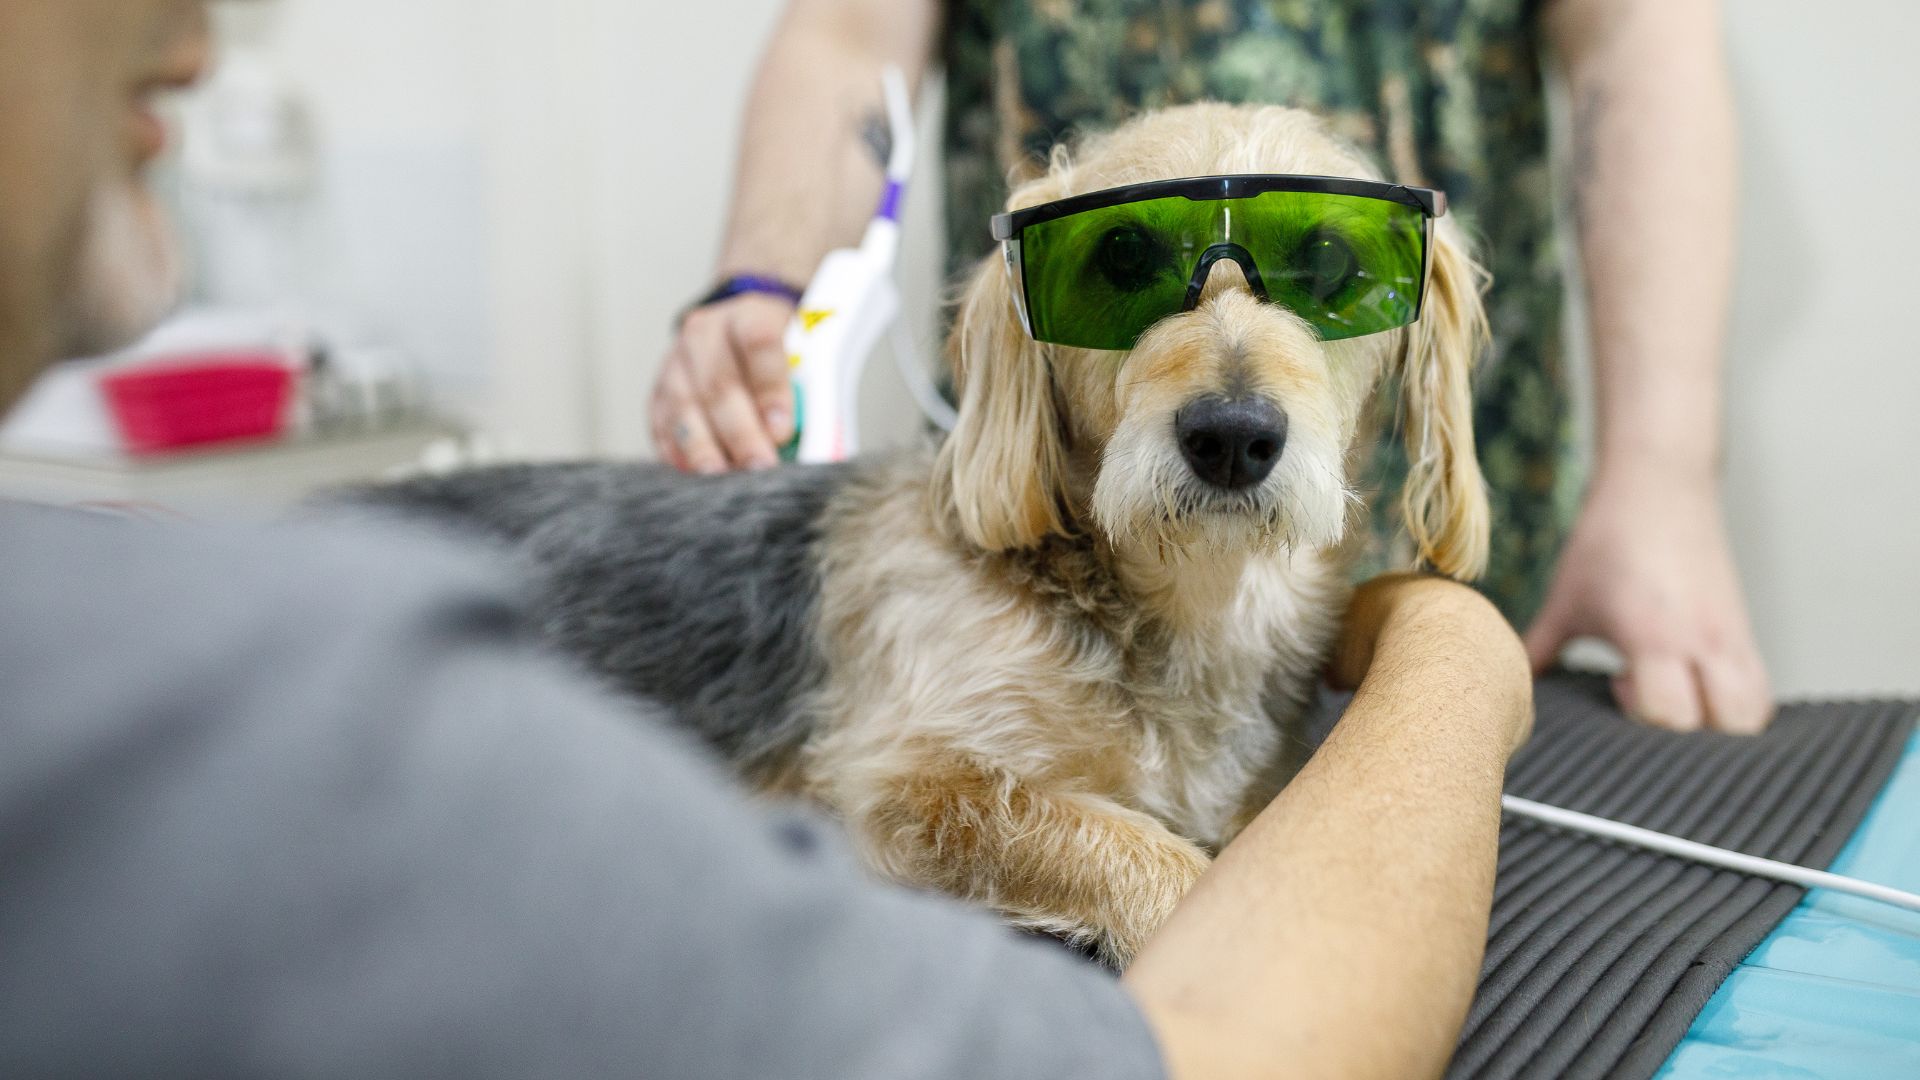 A dog wearing goggles and a person's arm